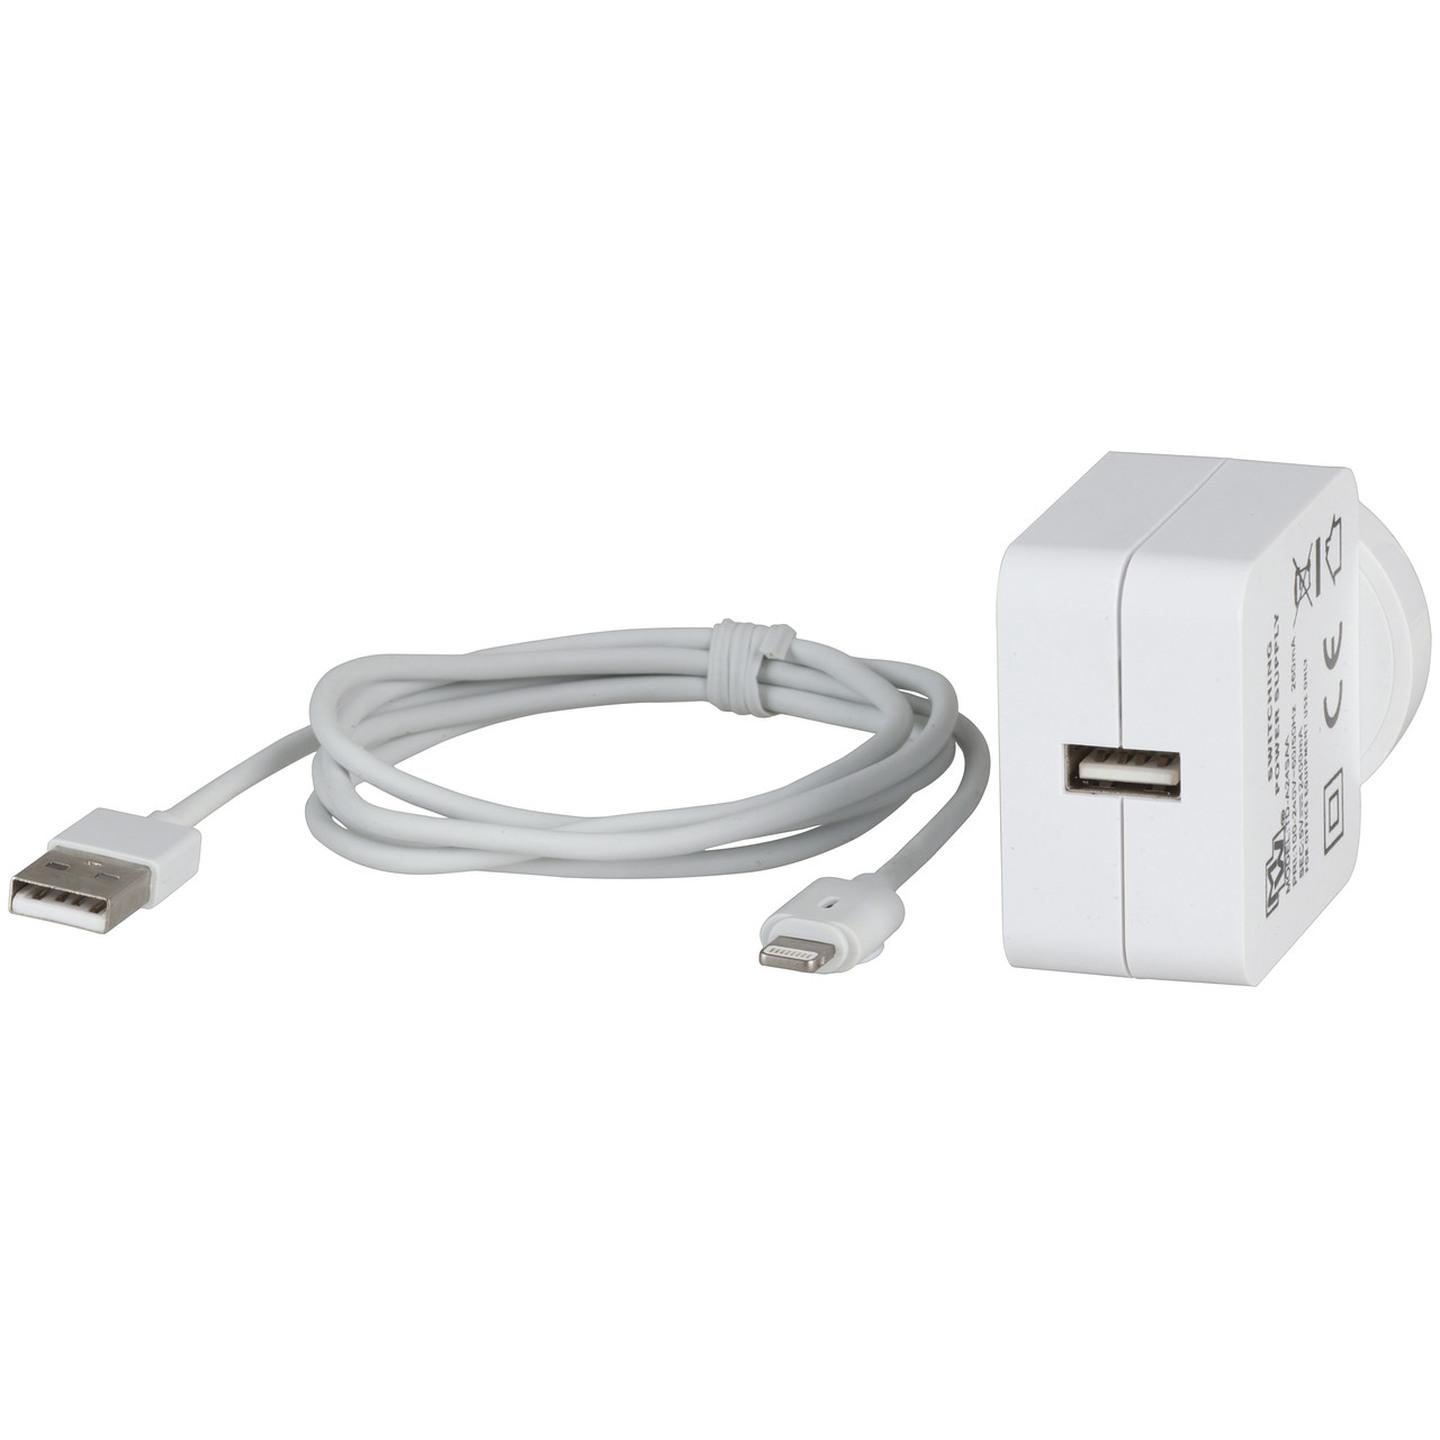 2.4A Wall Charger with Lightning Cable to suit iPhone iPad iPod